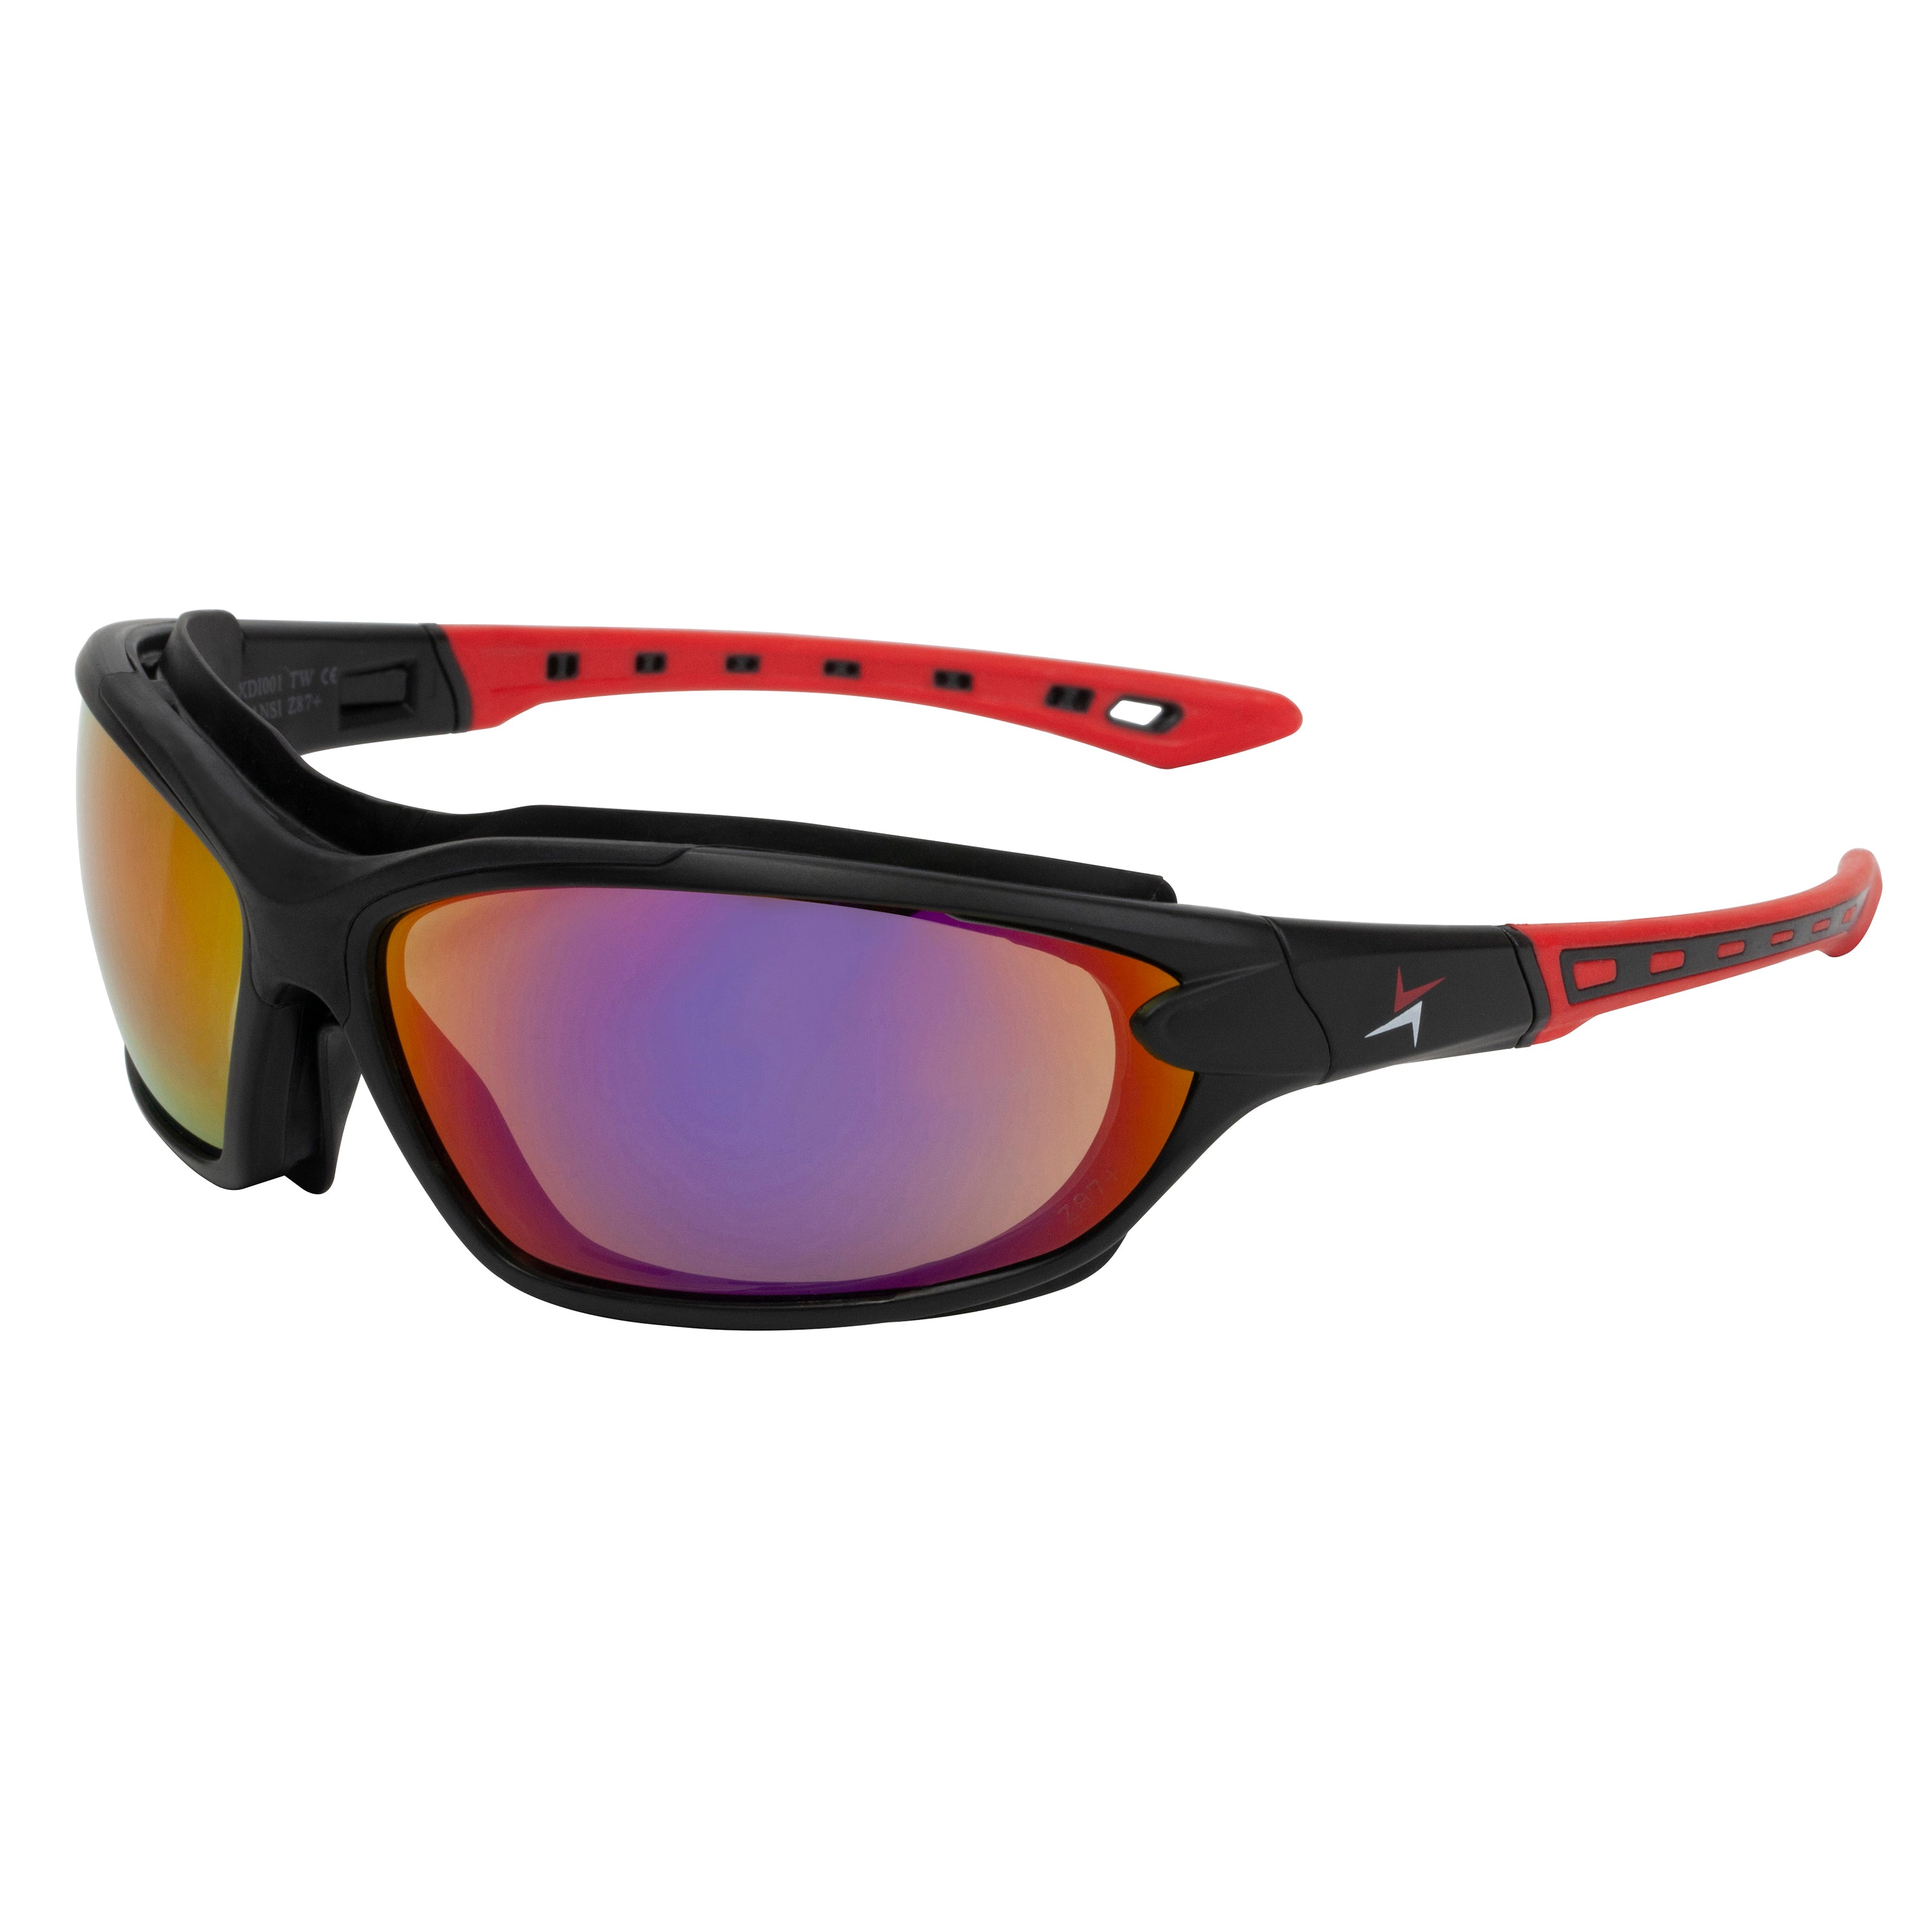 Red Mirror Lens Sport Safety Sunglasses with Swappable Strap and Gasketed Goggle Padding.